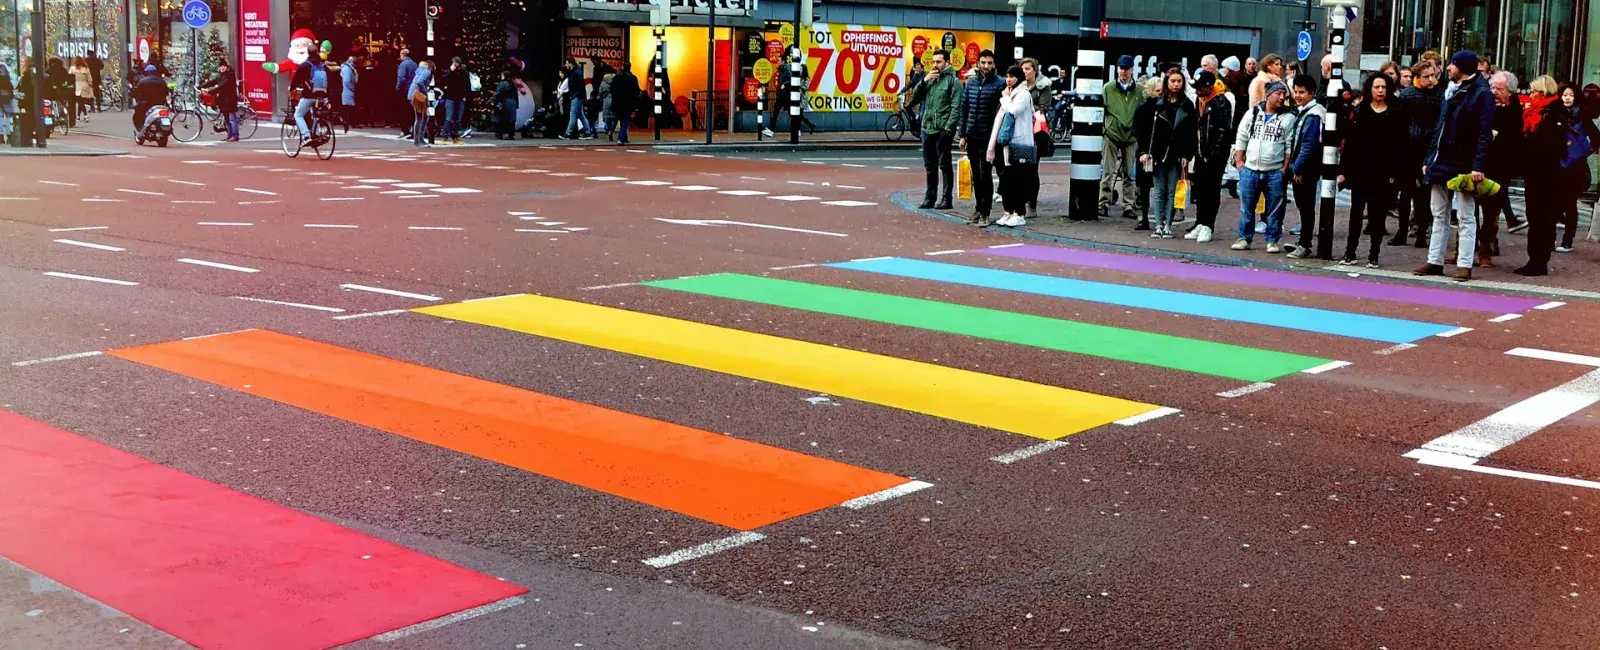 A rainbow crosswalk at an intersection with people waiting to cross. LGBTQ-owned